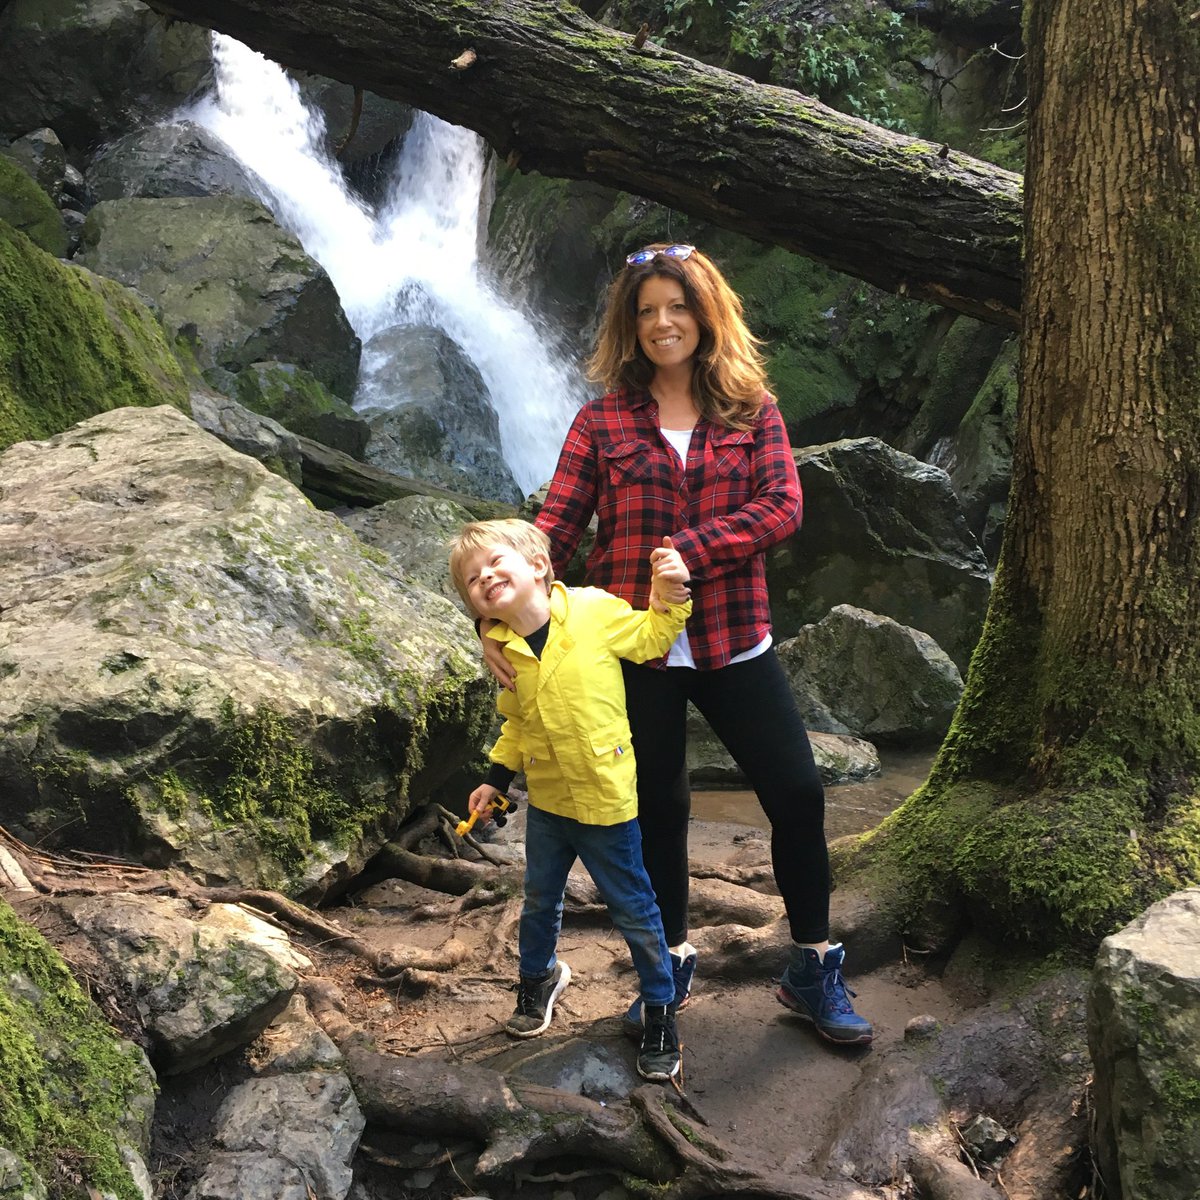 This little dude hiked 3 miles today @SugarloafRidge. 4 y-o & I only had to carry him once for @ 25 feet. He stuck out the rest & seemed to have a blast finding waterfalls w/his mama on the #CanyonTrail at #Sugarloaf. #hikingtoddler #hikingwithkids #sonoma #sonomavalley #hiking